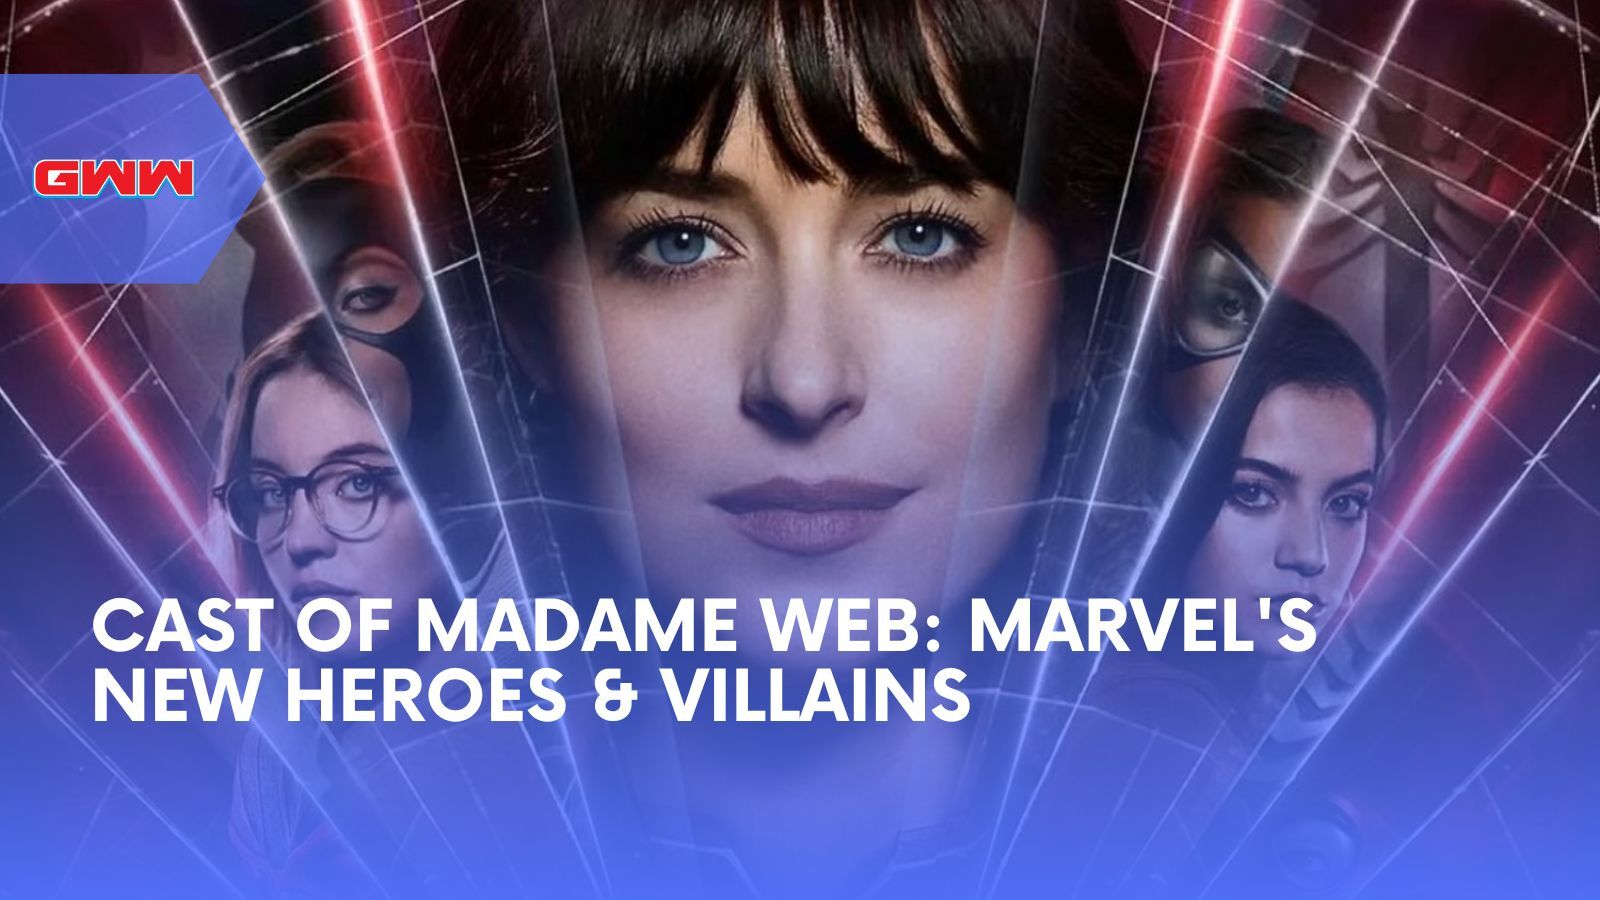 Cast of Madame Web: Marvel's New Heroes & Villains